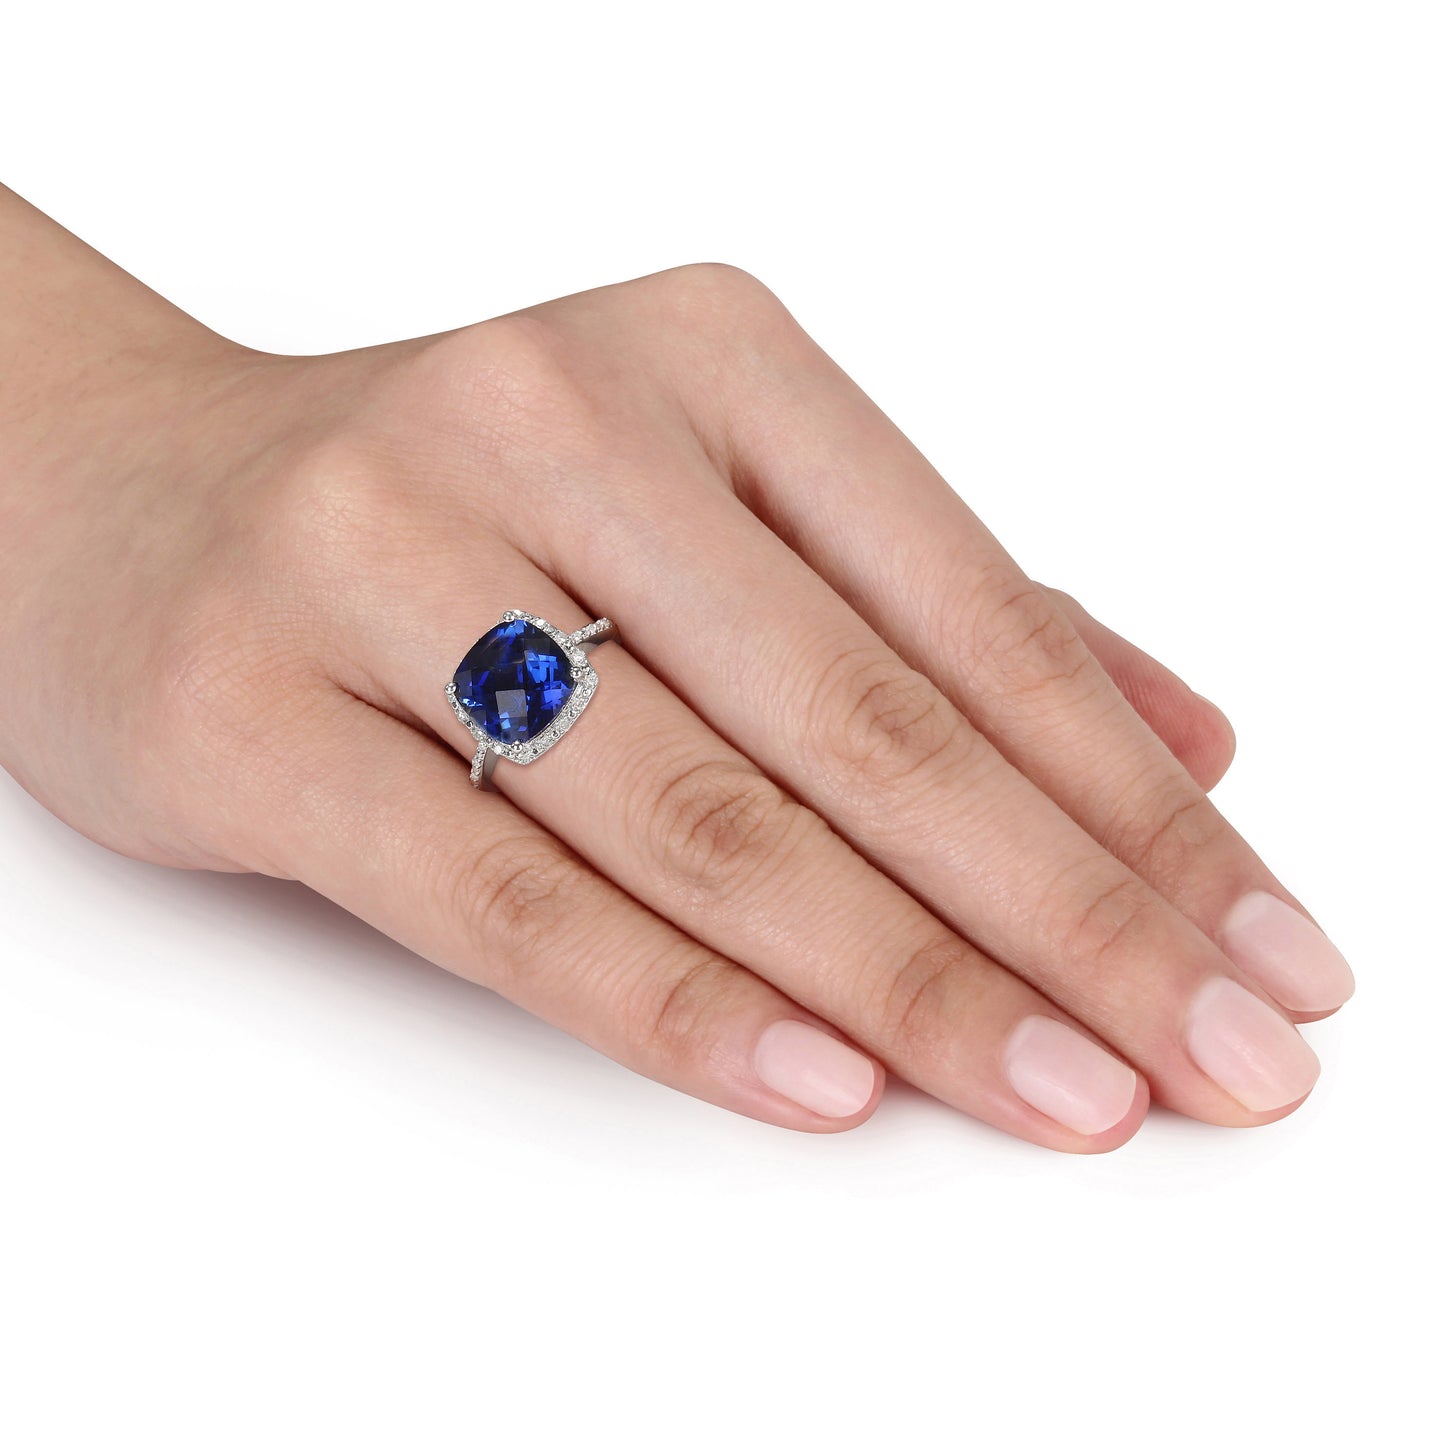 Cushion Cut Sapphire & Diamond Halo Ring in Sterling Silver